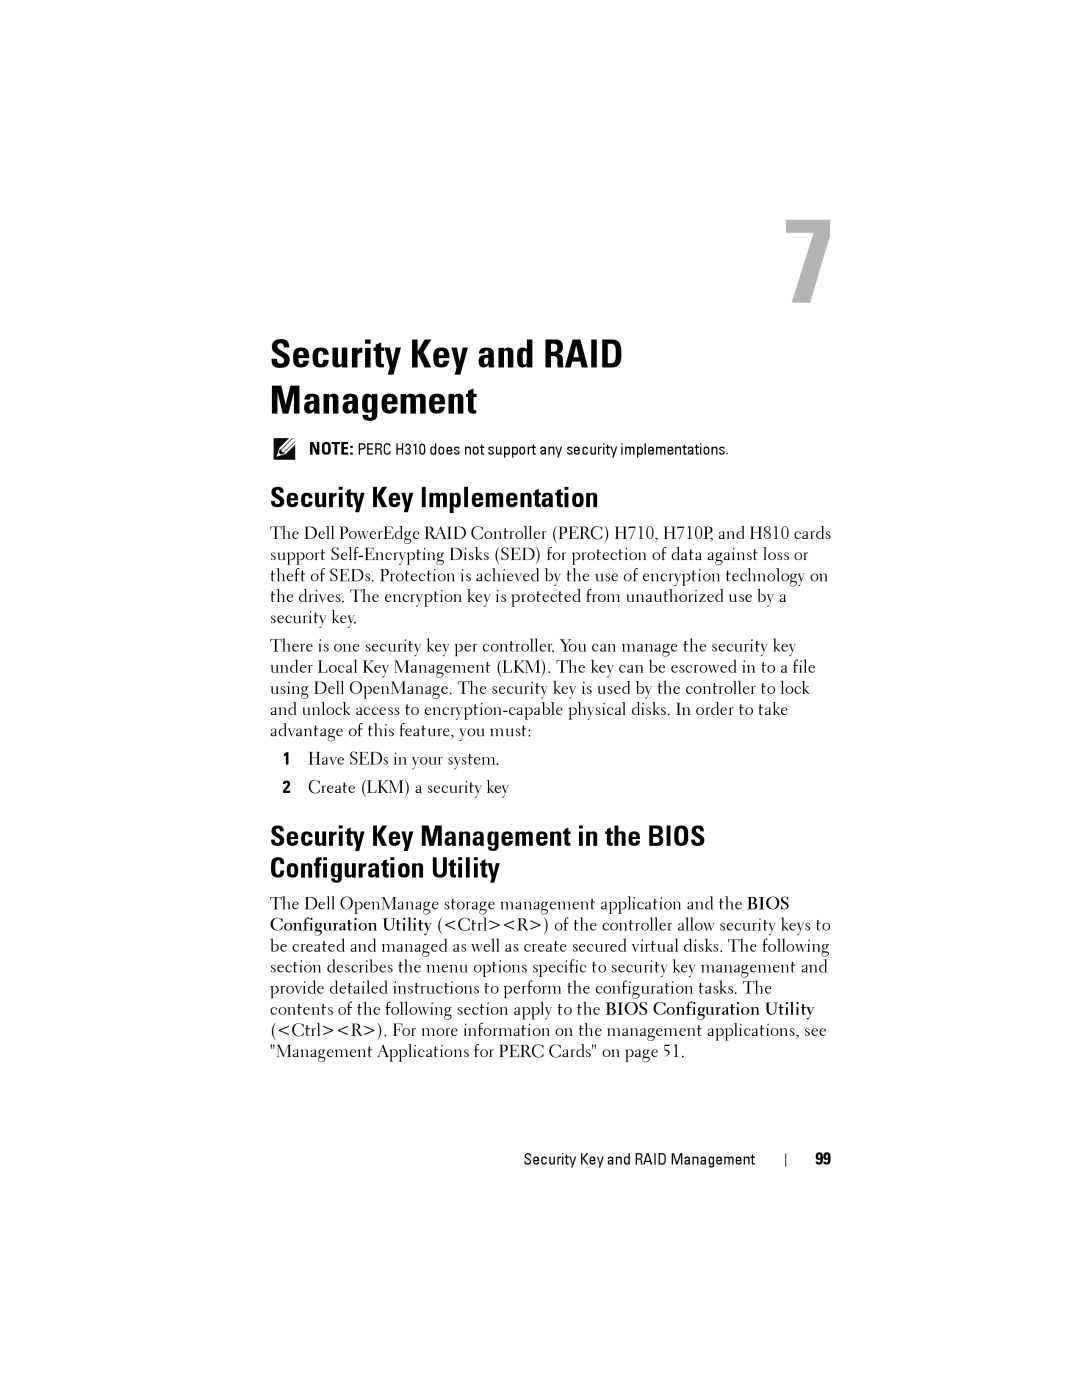 Dell H810, H710P, H310 manual Security Key and RAID Management, Security Key Implementation 